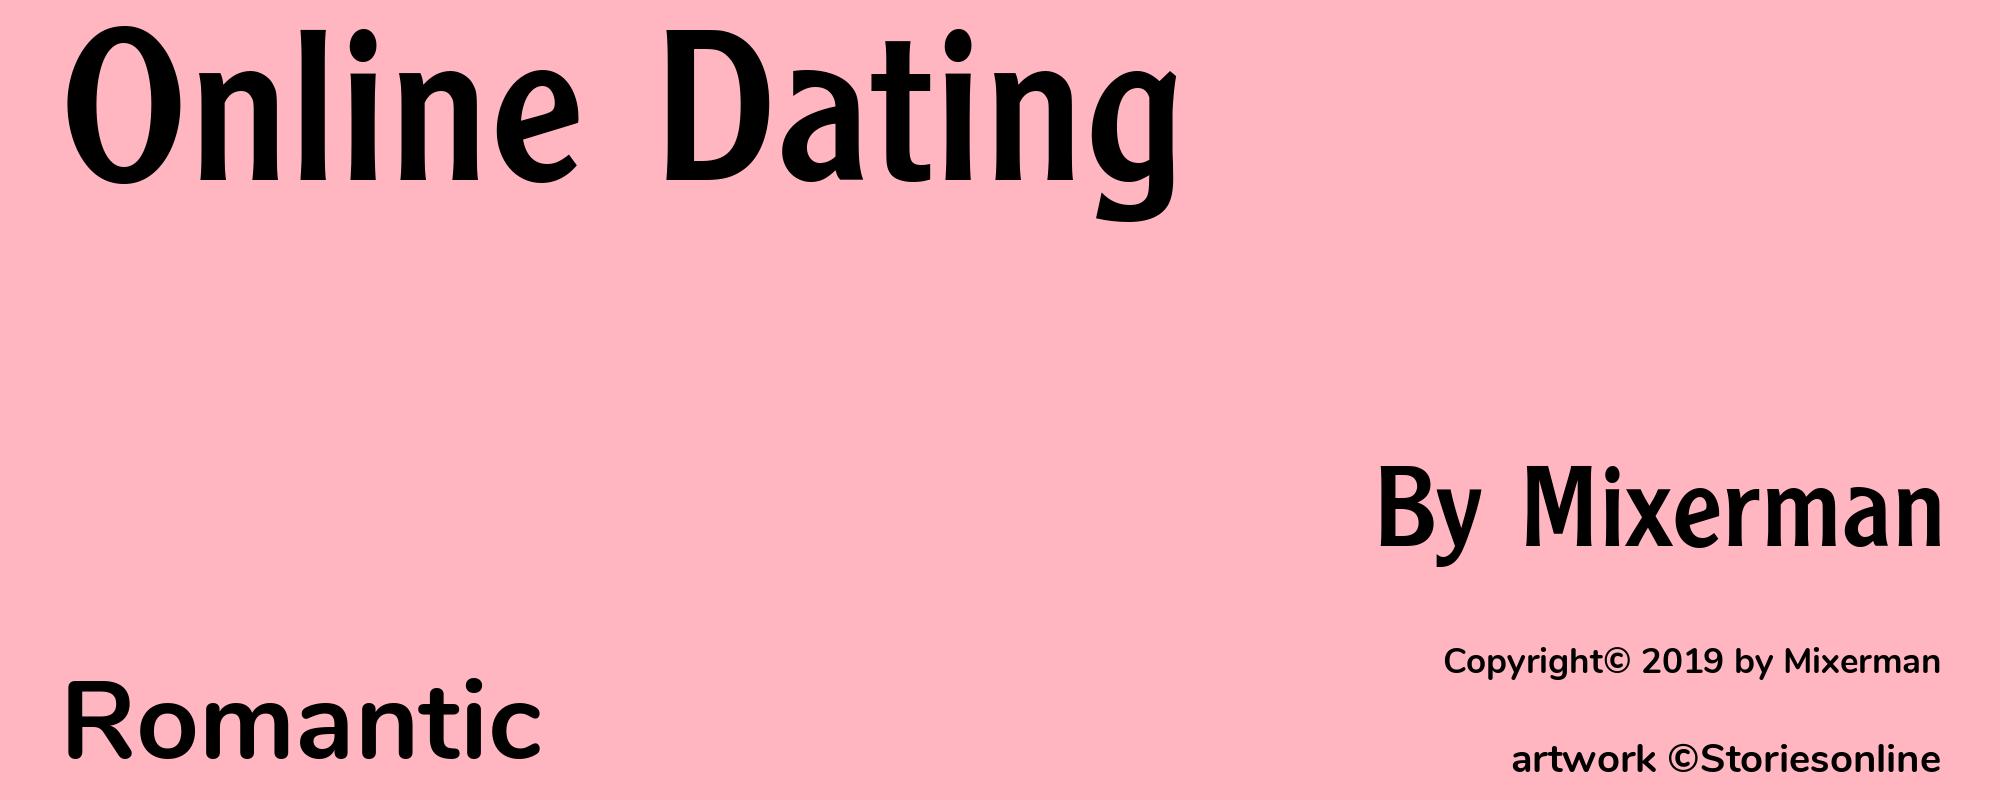 Online Dating - Cover